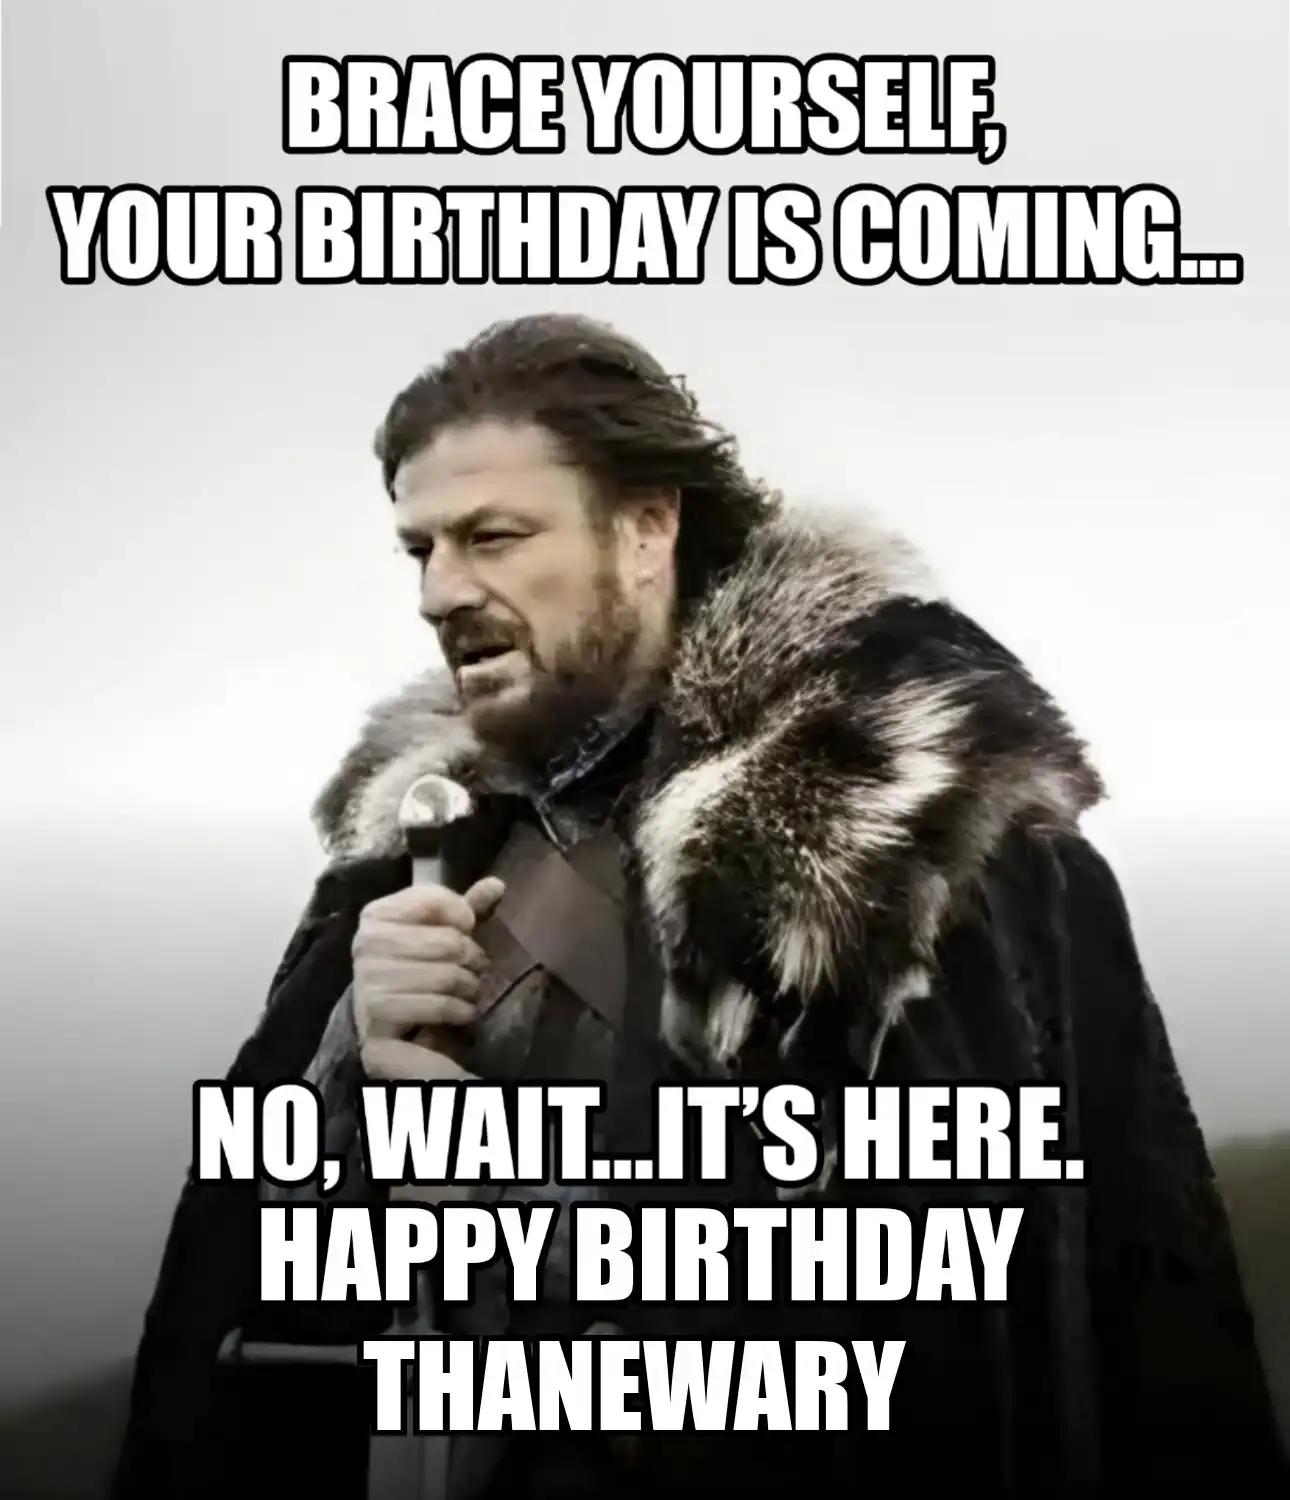 Happy Birthday Thanewary Brace Yourself Your Birthday Is Coming Meme